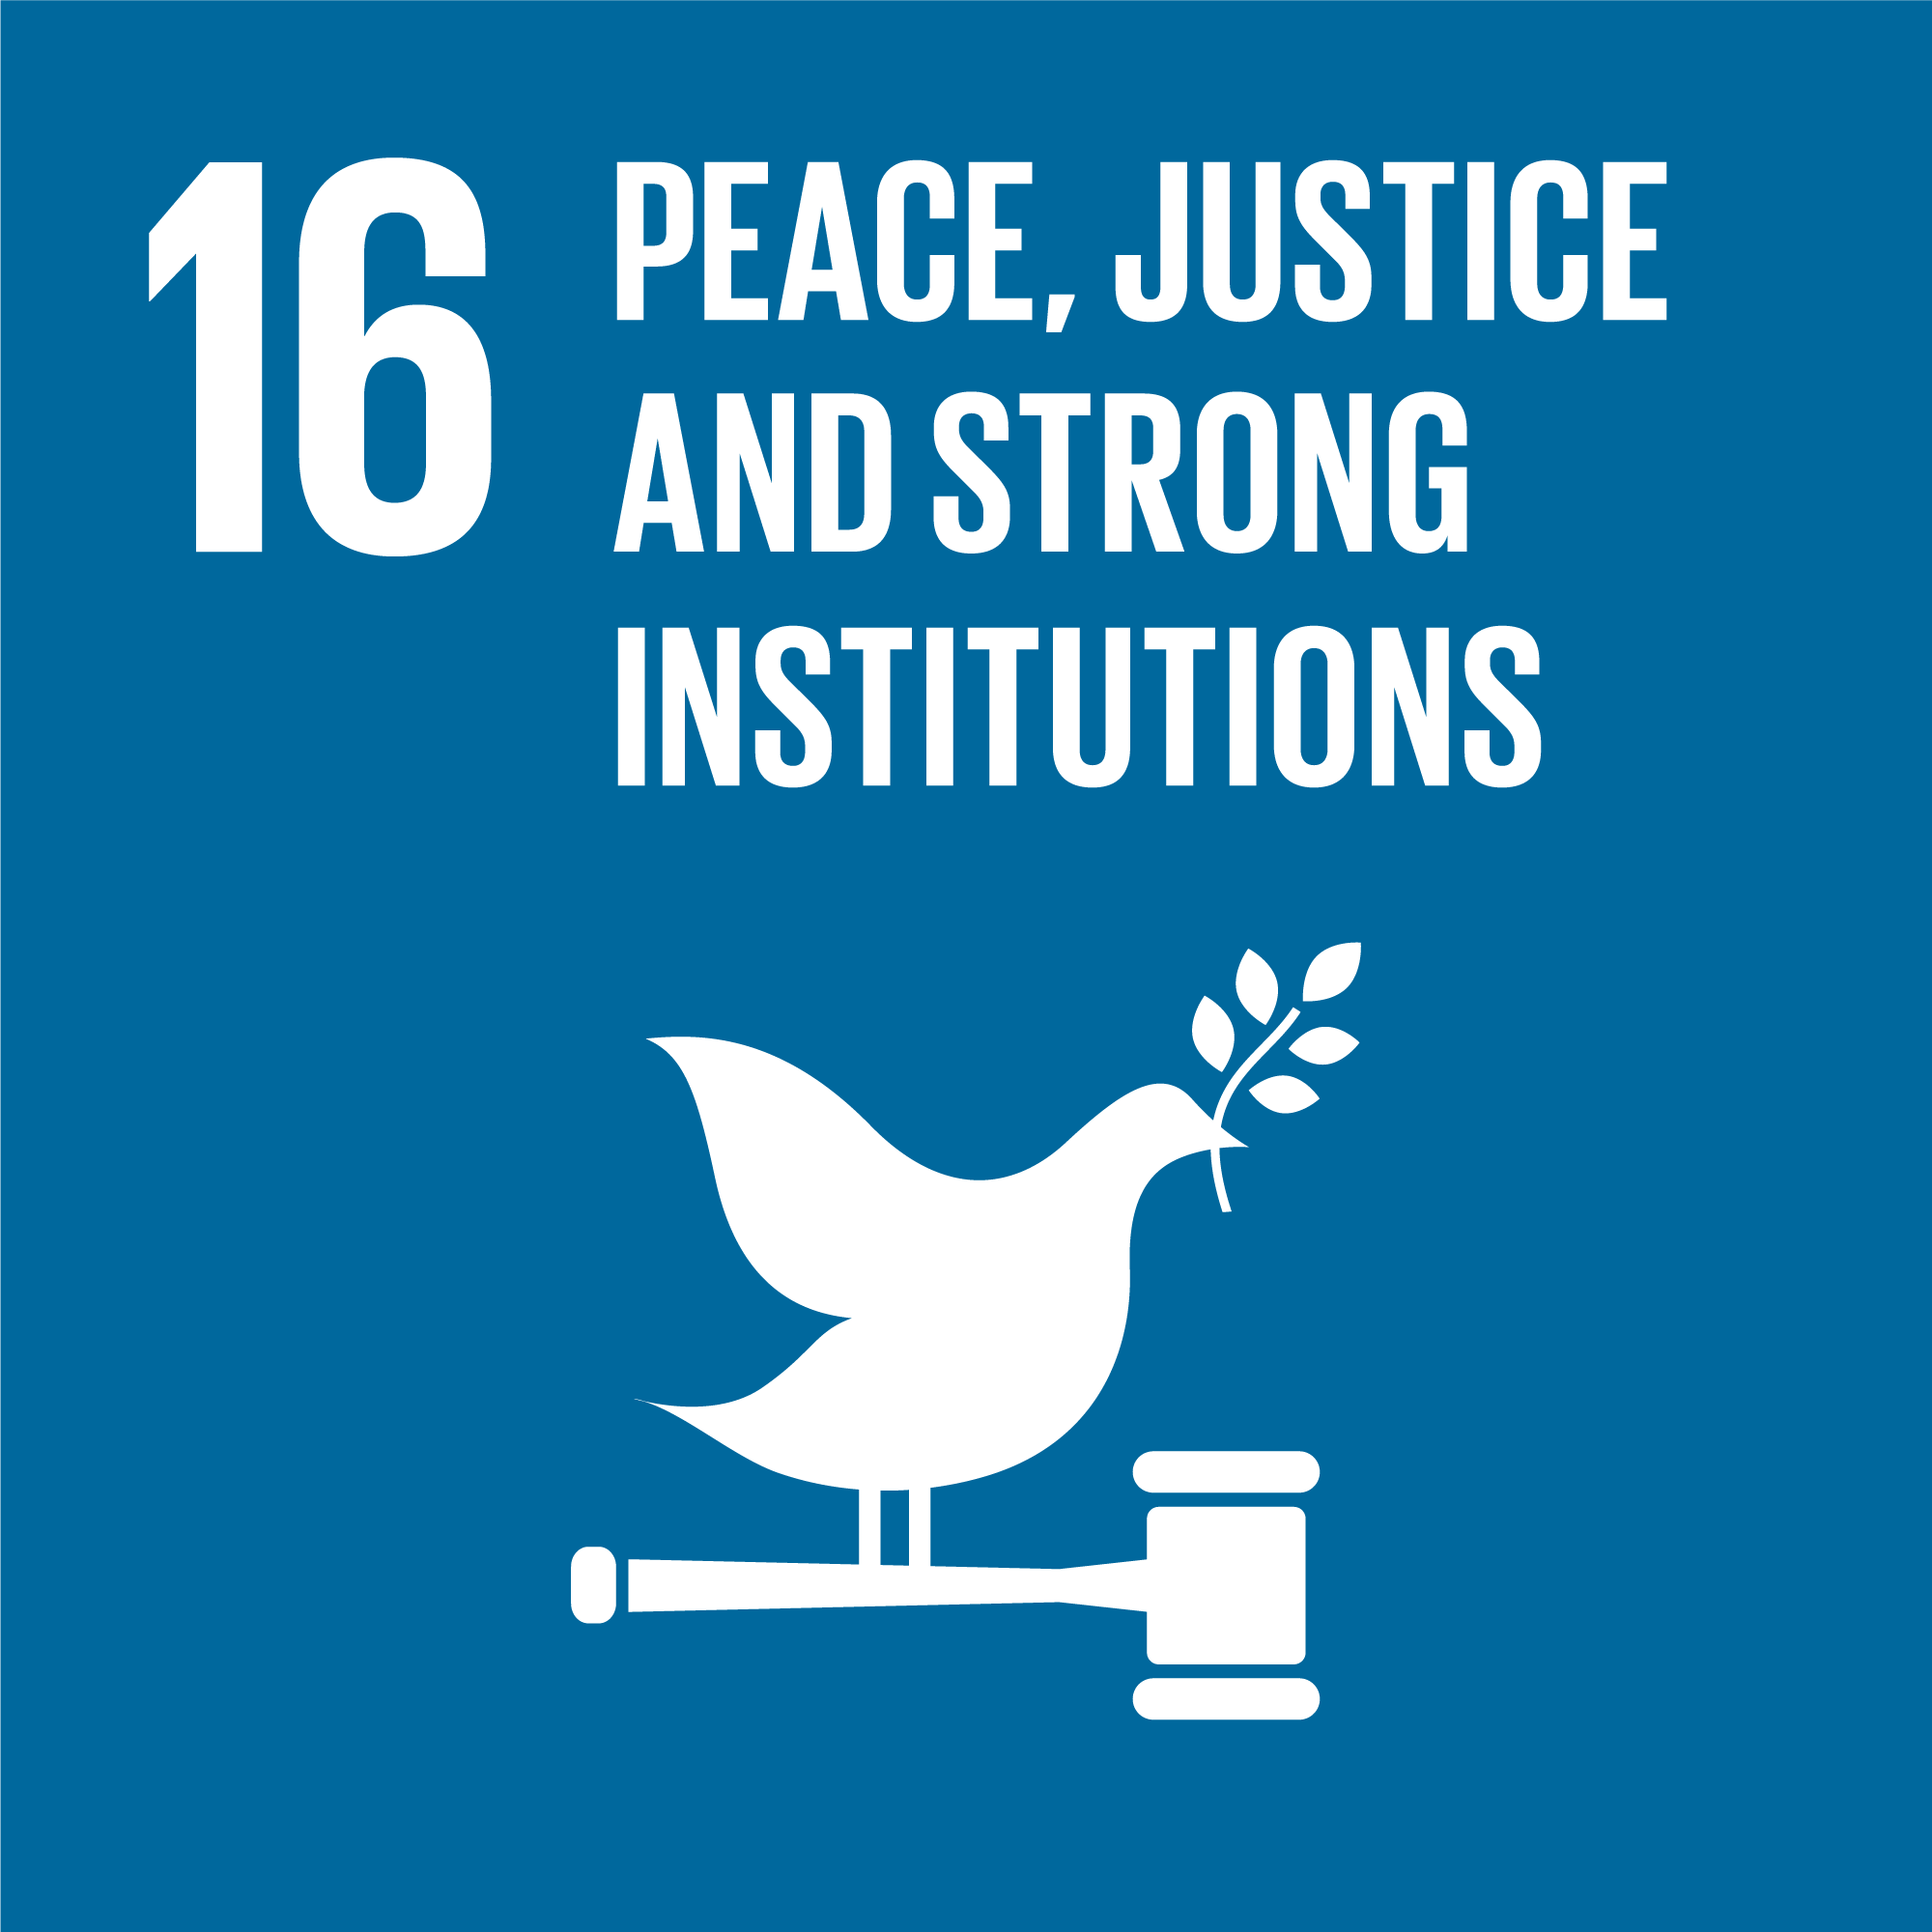 Goal 16: Peace, Justice and Strong Institutions - Promote peaceful and inclusive societies for sustainable development, provide access to justice for all and build effective, accountable and inclusive institutions at all levels